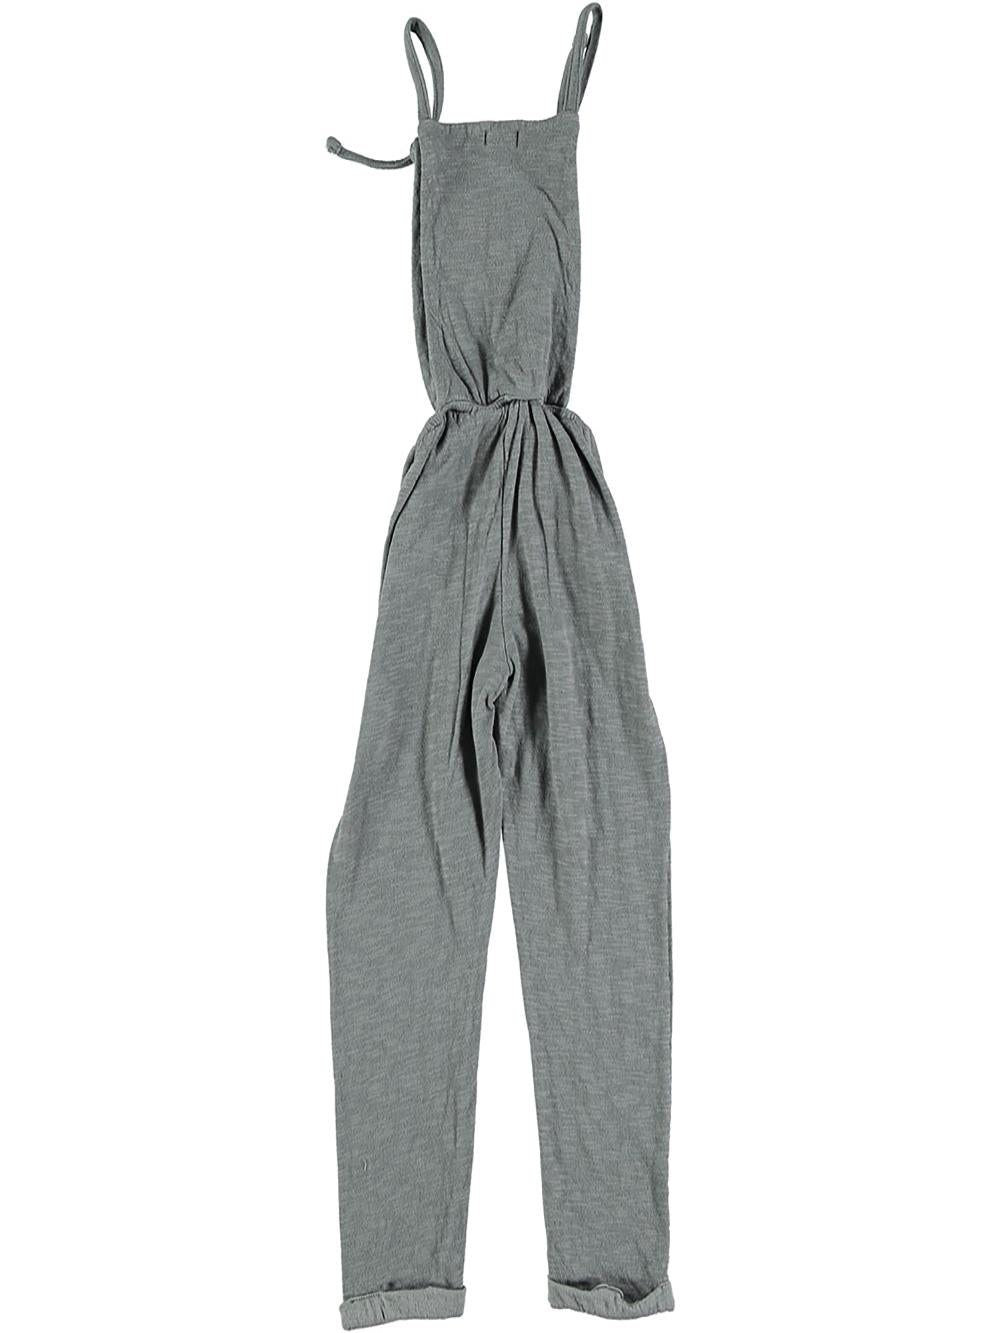 GRAY JUMPSUIT WITH GOLD HORIZONTAL STRIPES